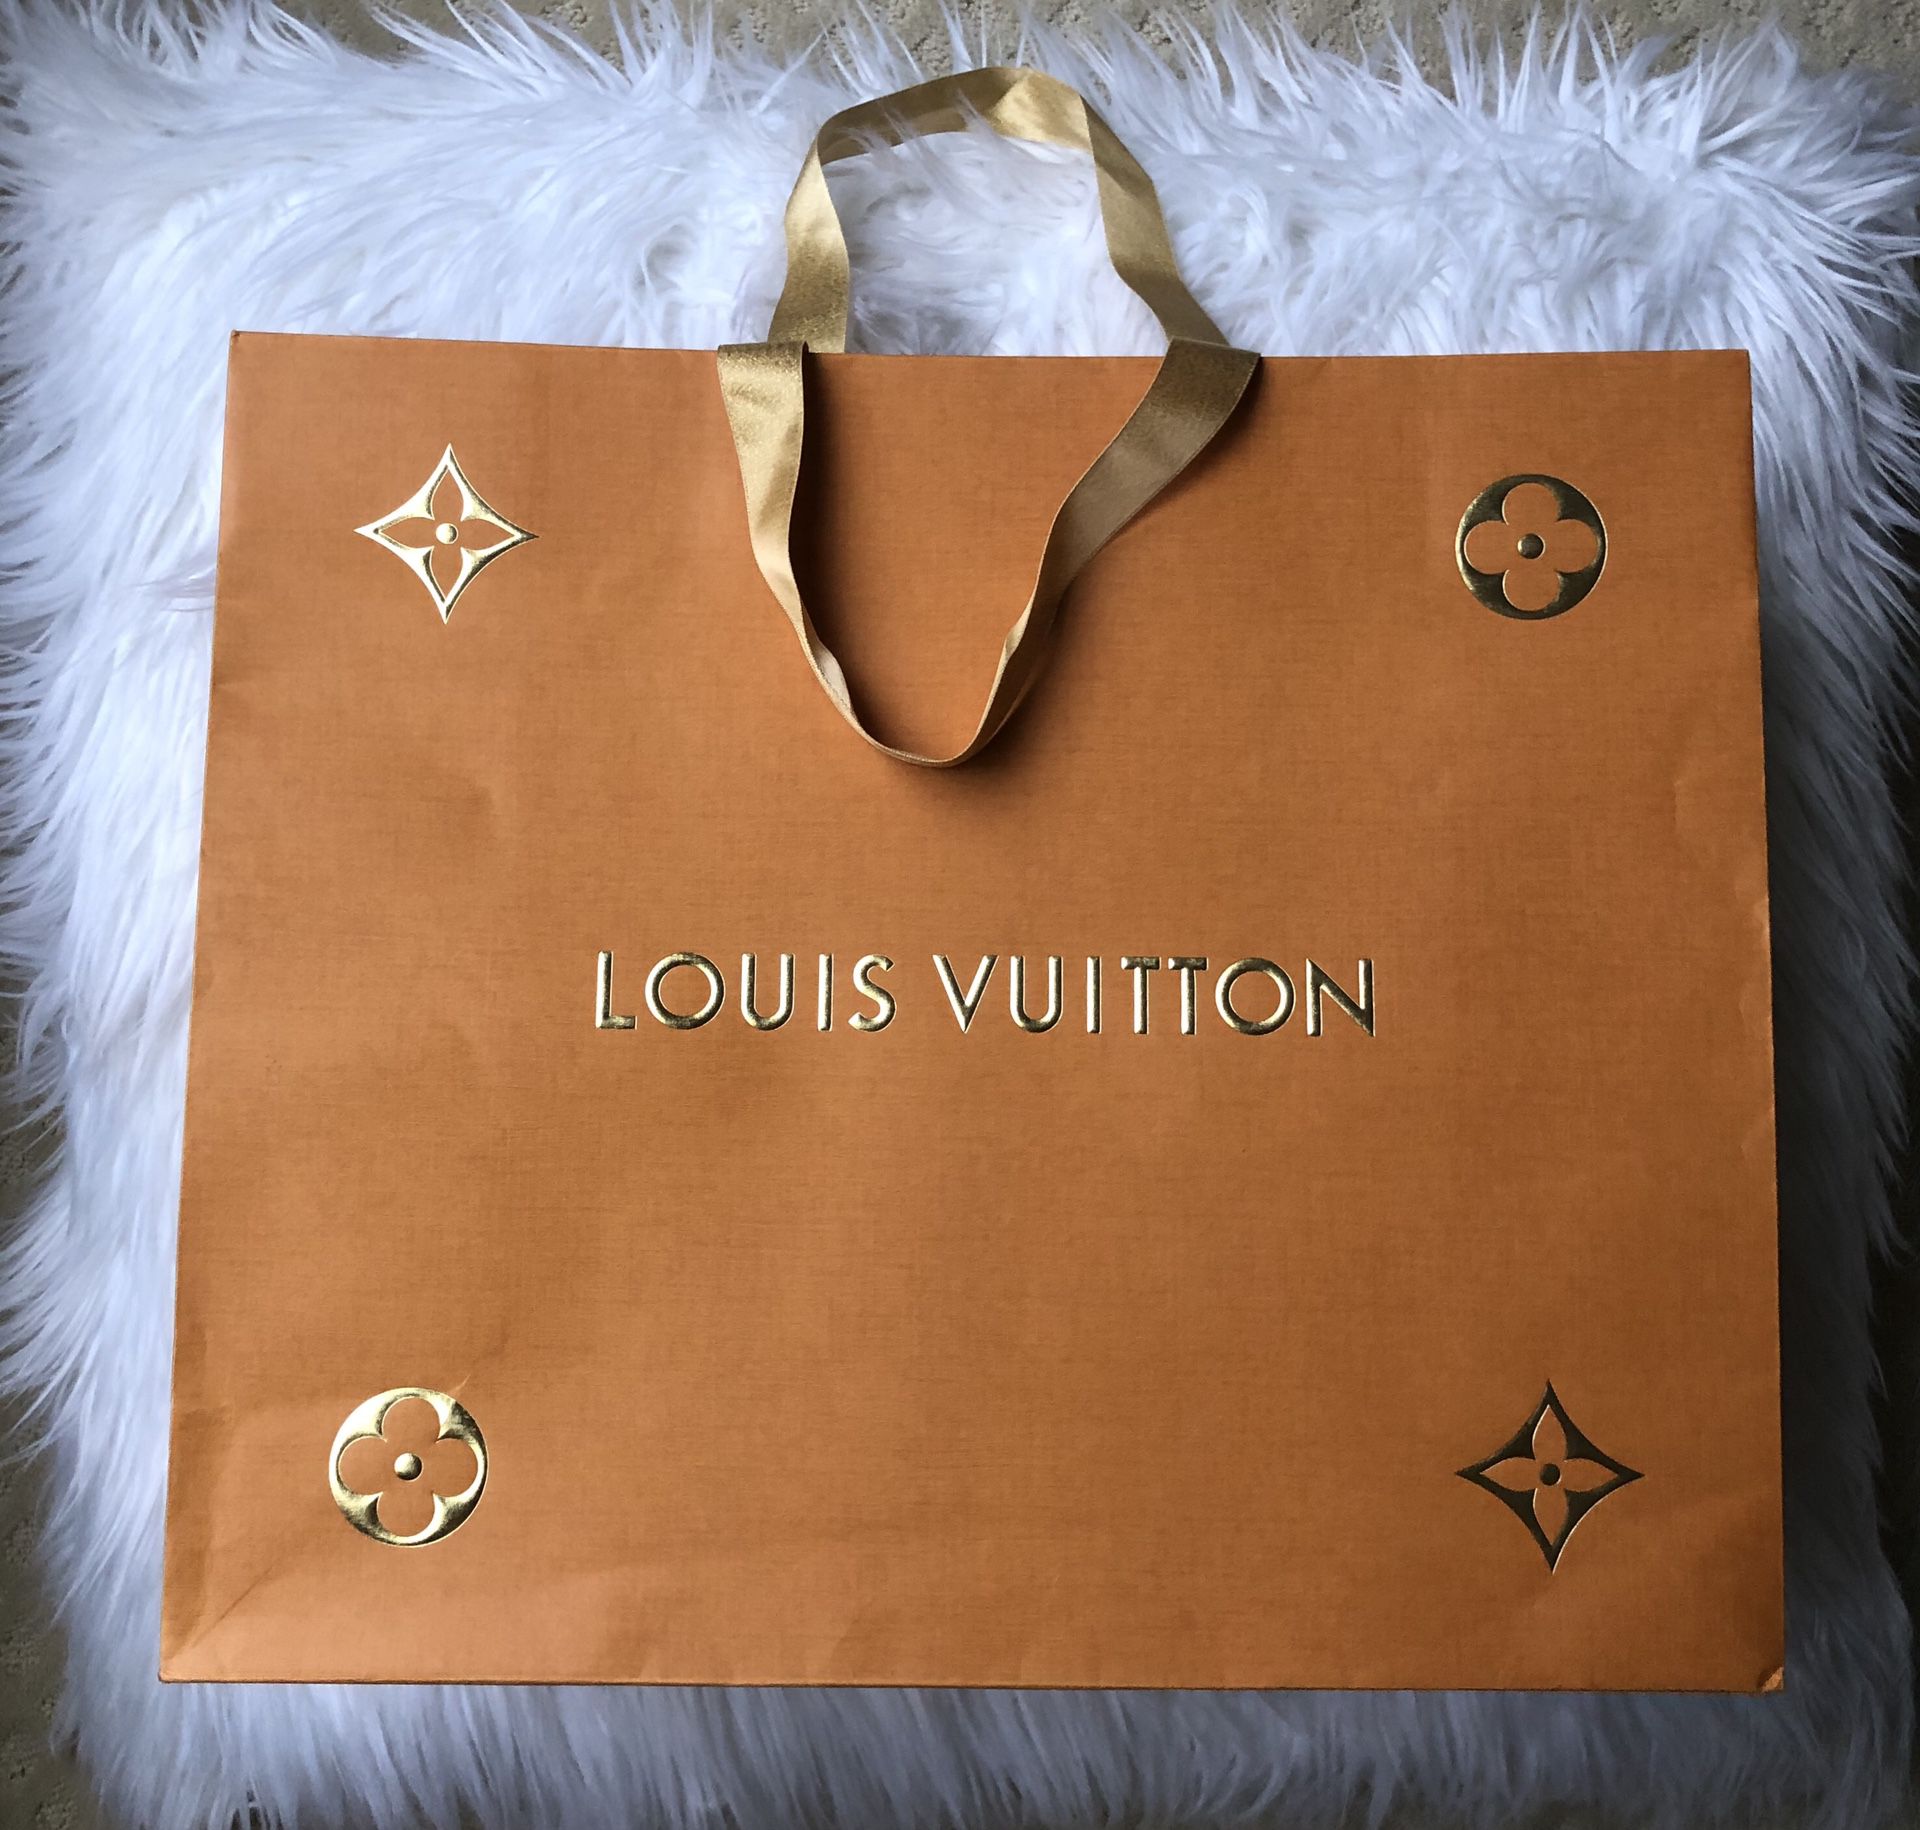 Louis Vuitton Twist PM Bags for Sale in Columbus, OH - OfferUp